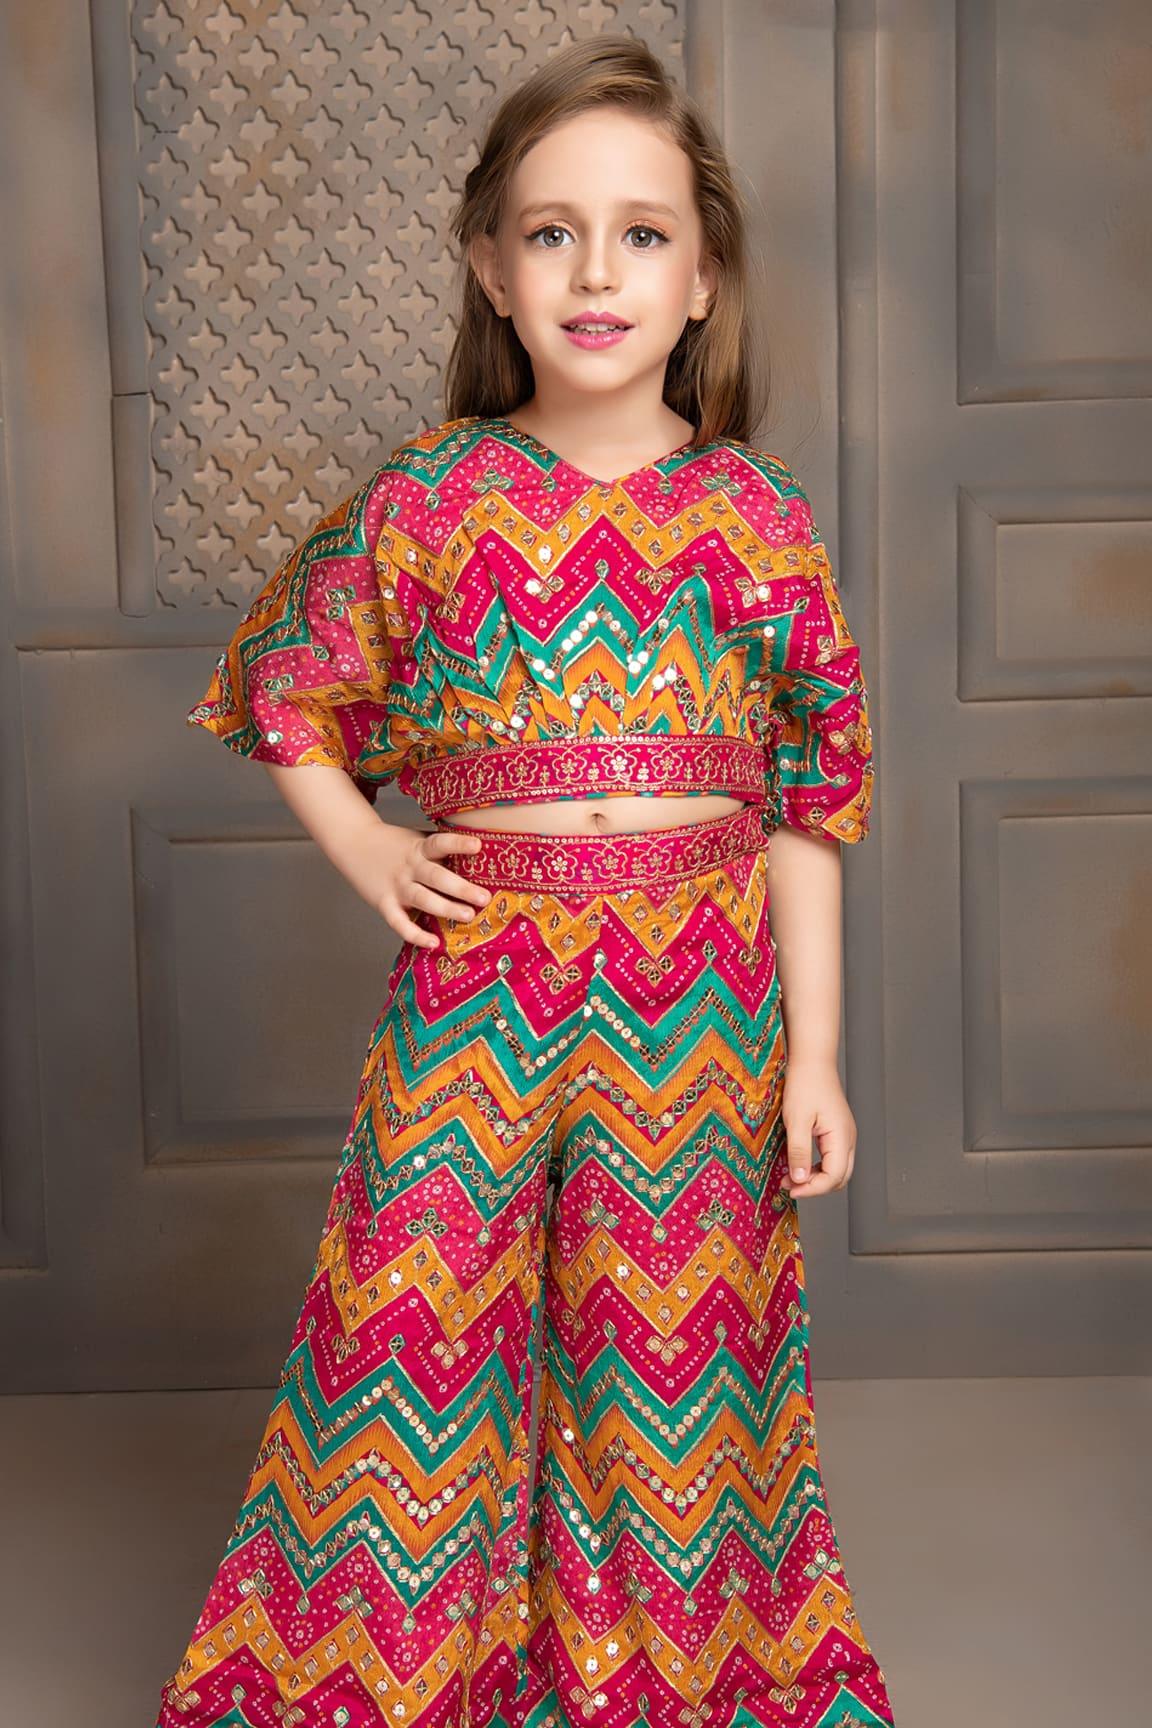 Red Palazzo Set With Mirrorwork And Zigzag Pattern For Girls - Lagorii Kids